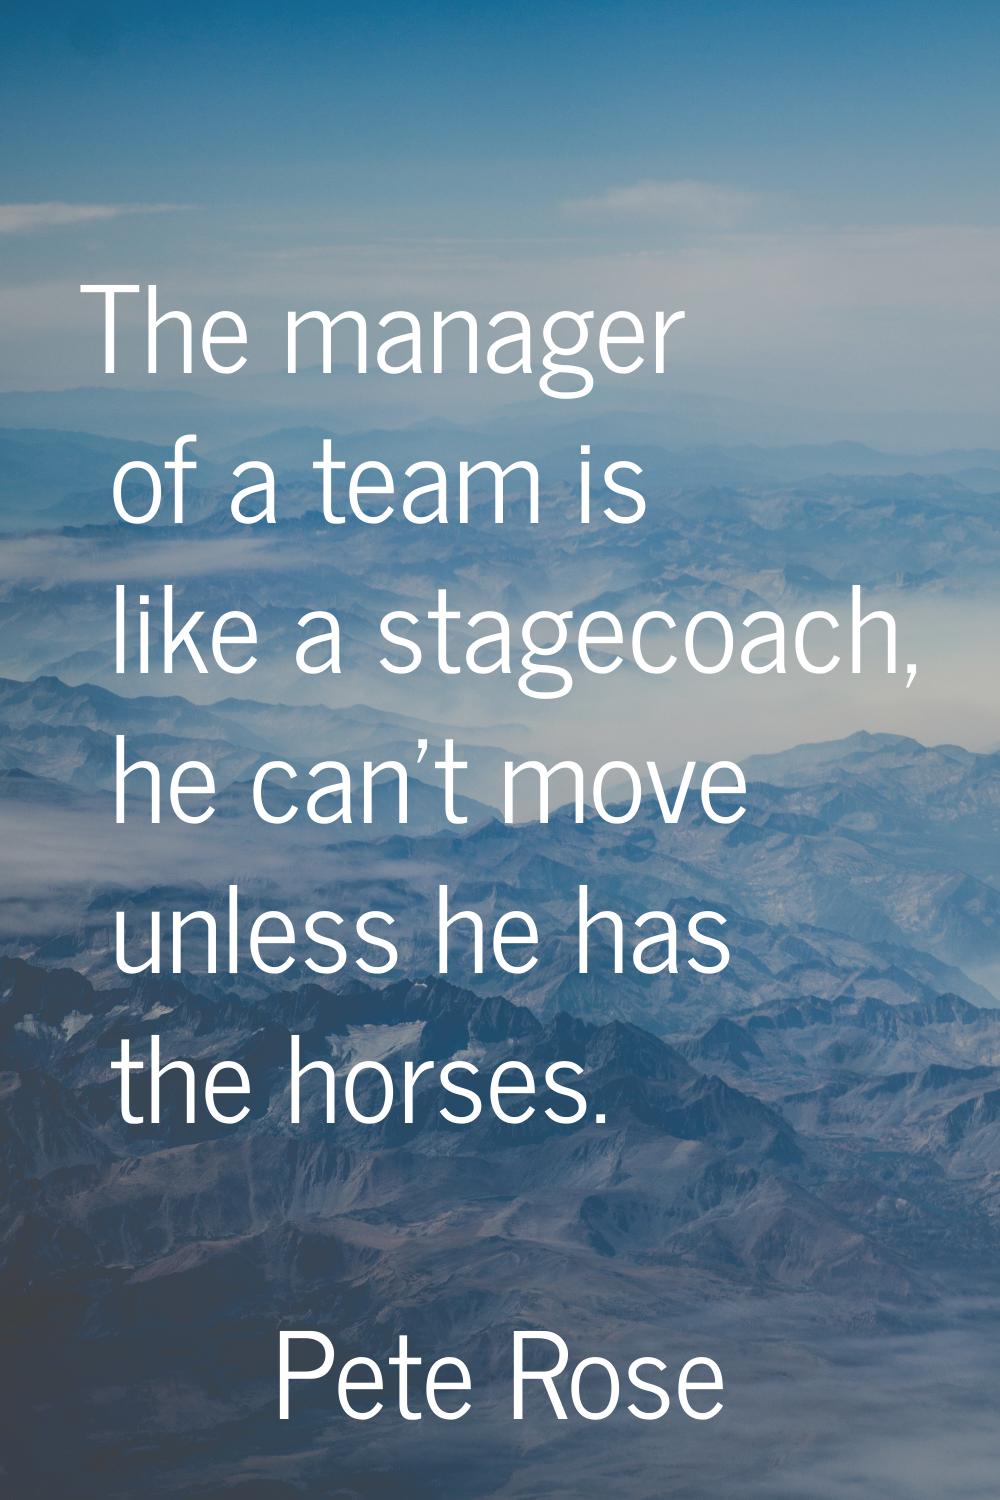 The manager of a team is like a stagecoach, he can't move unless he has the horses.